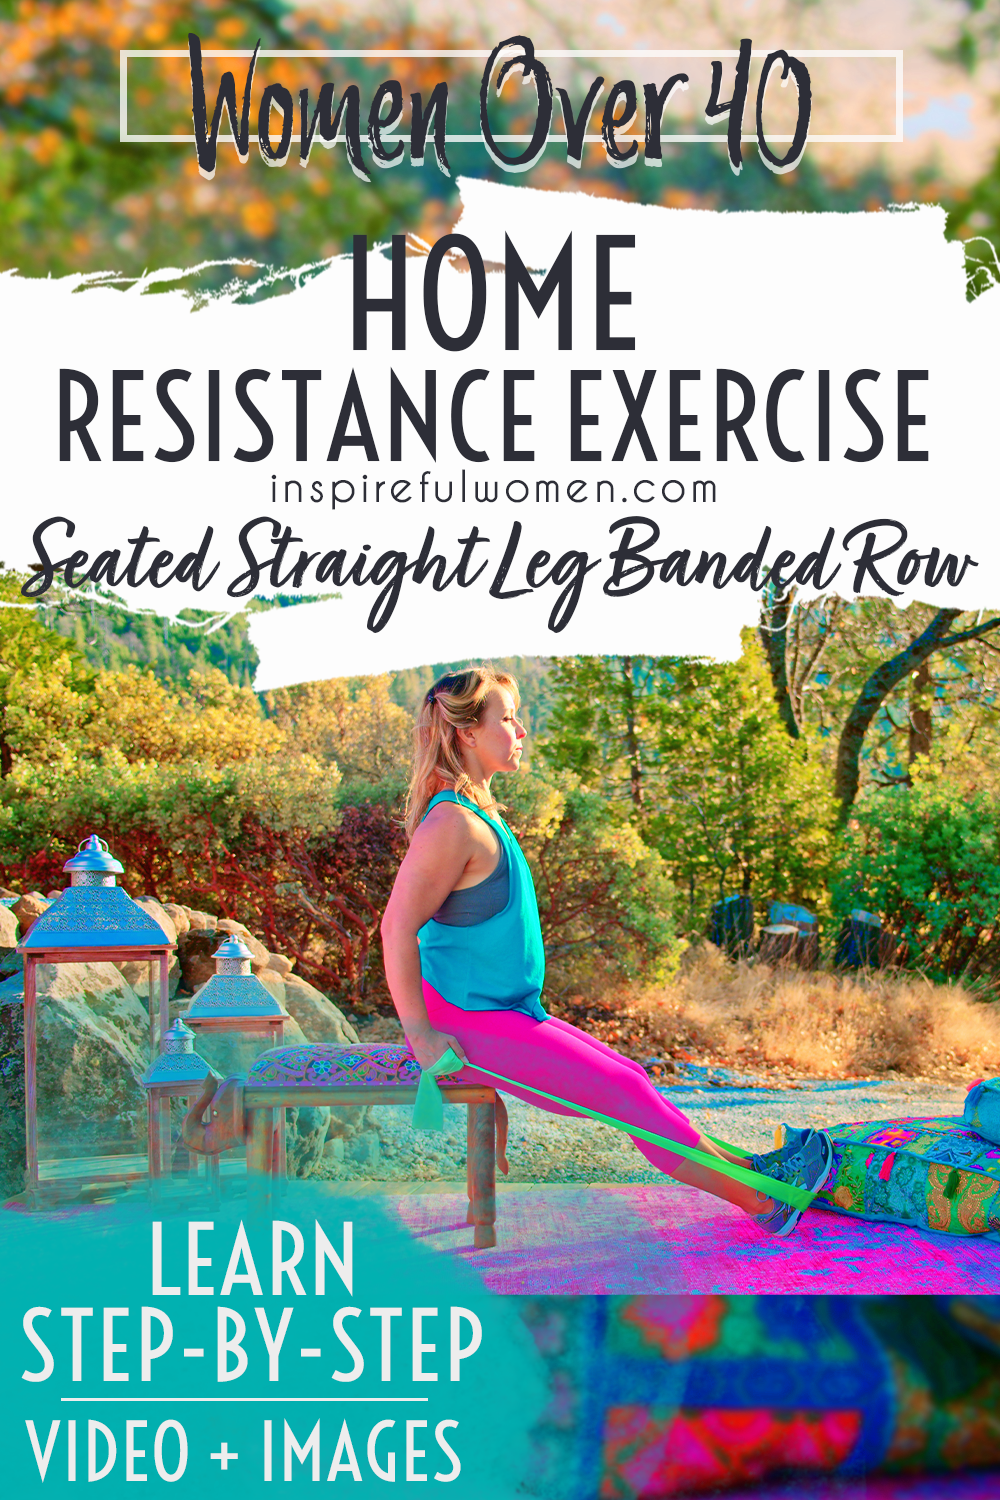 seated-resistance-band-row-straight-leg-upright-torso-latissimus-dorsi-exercise-home-for-women-40-above